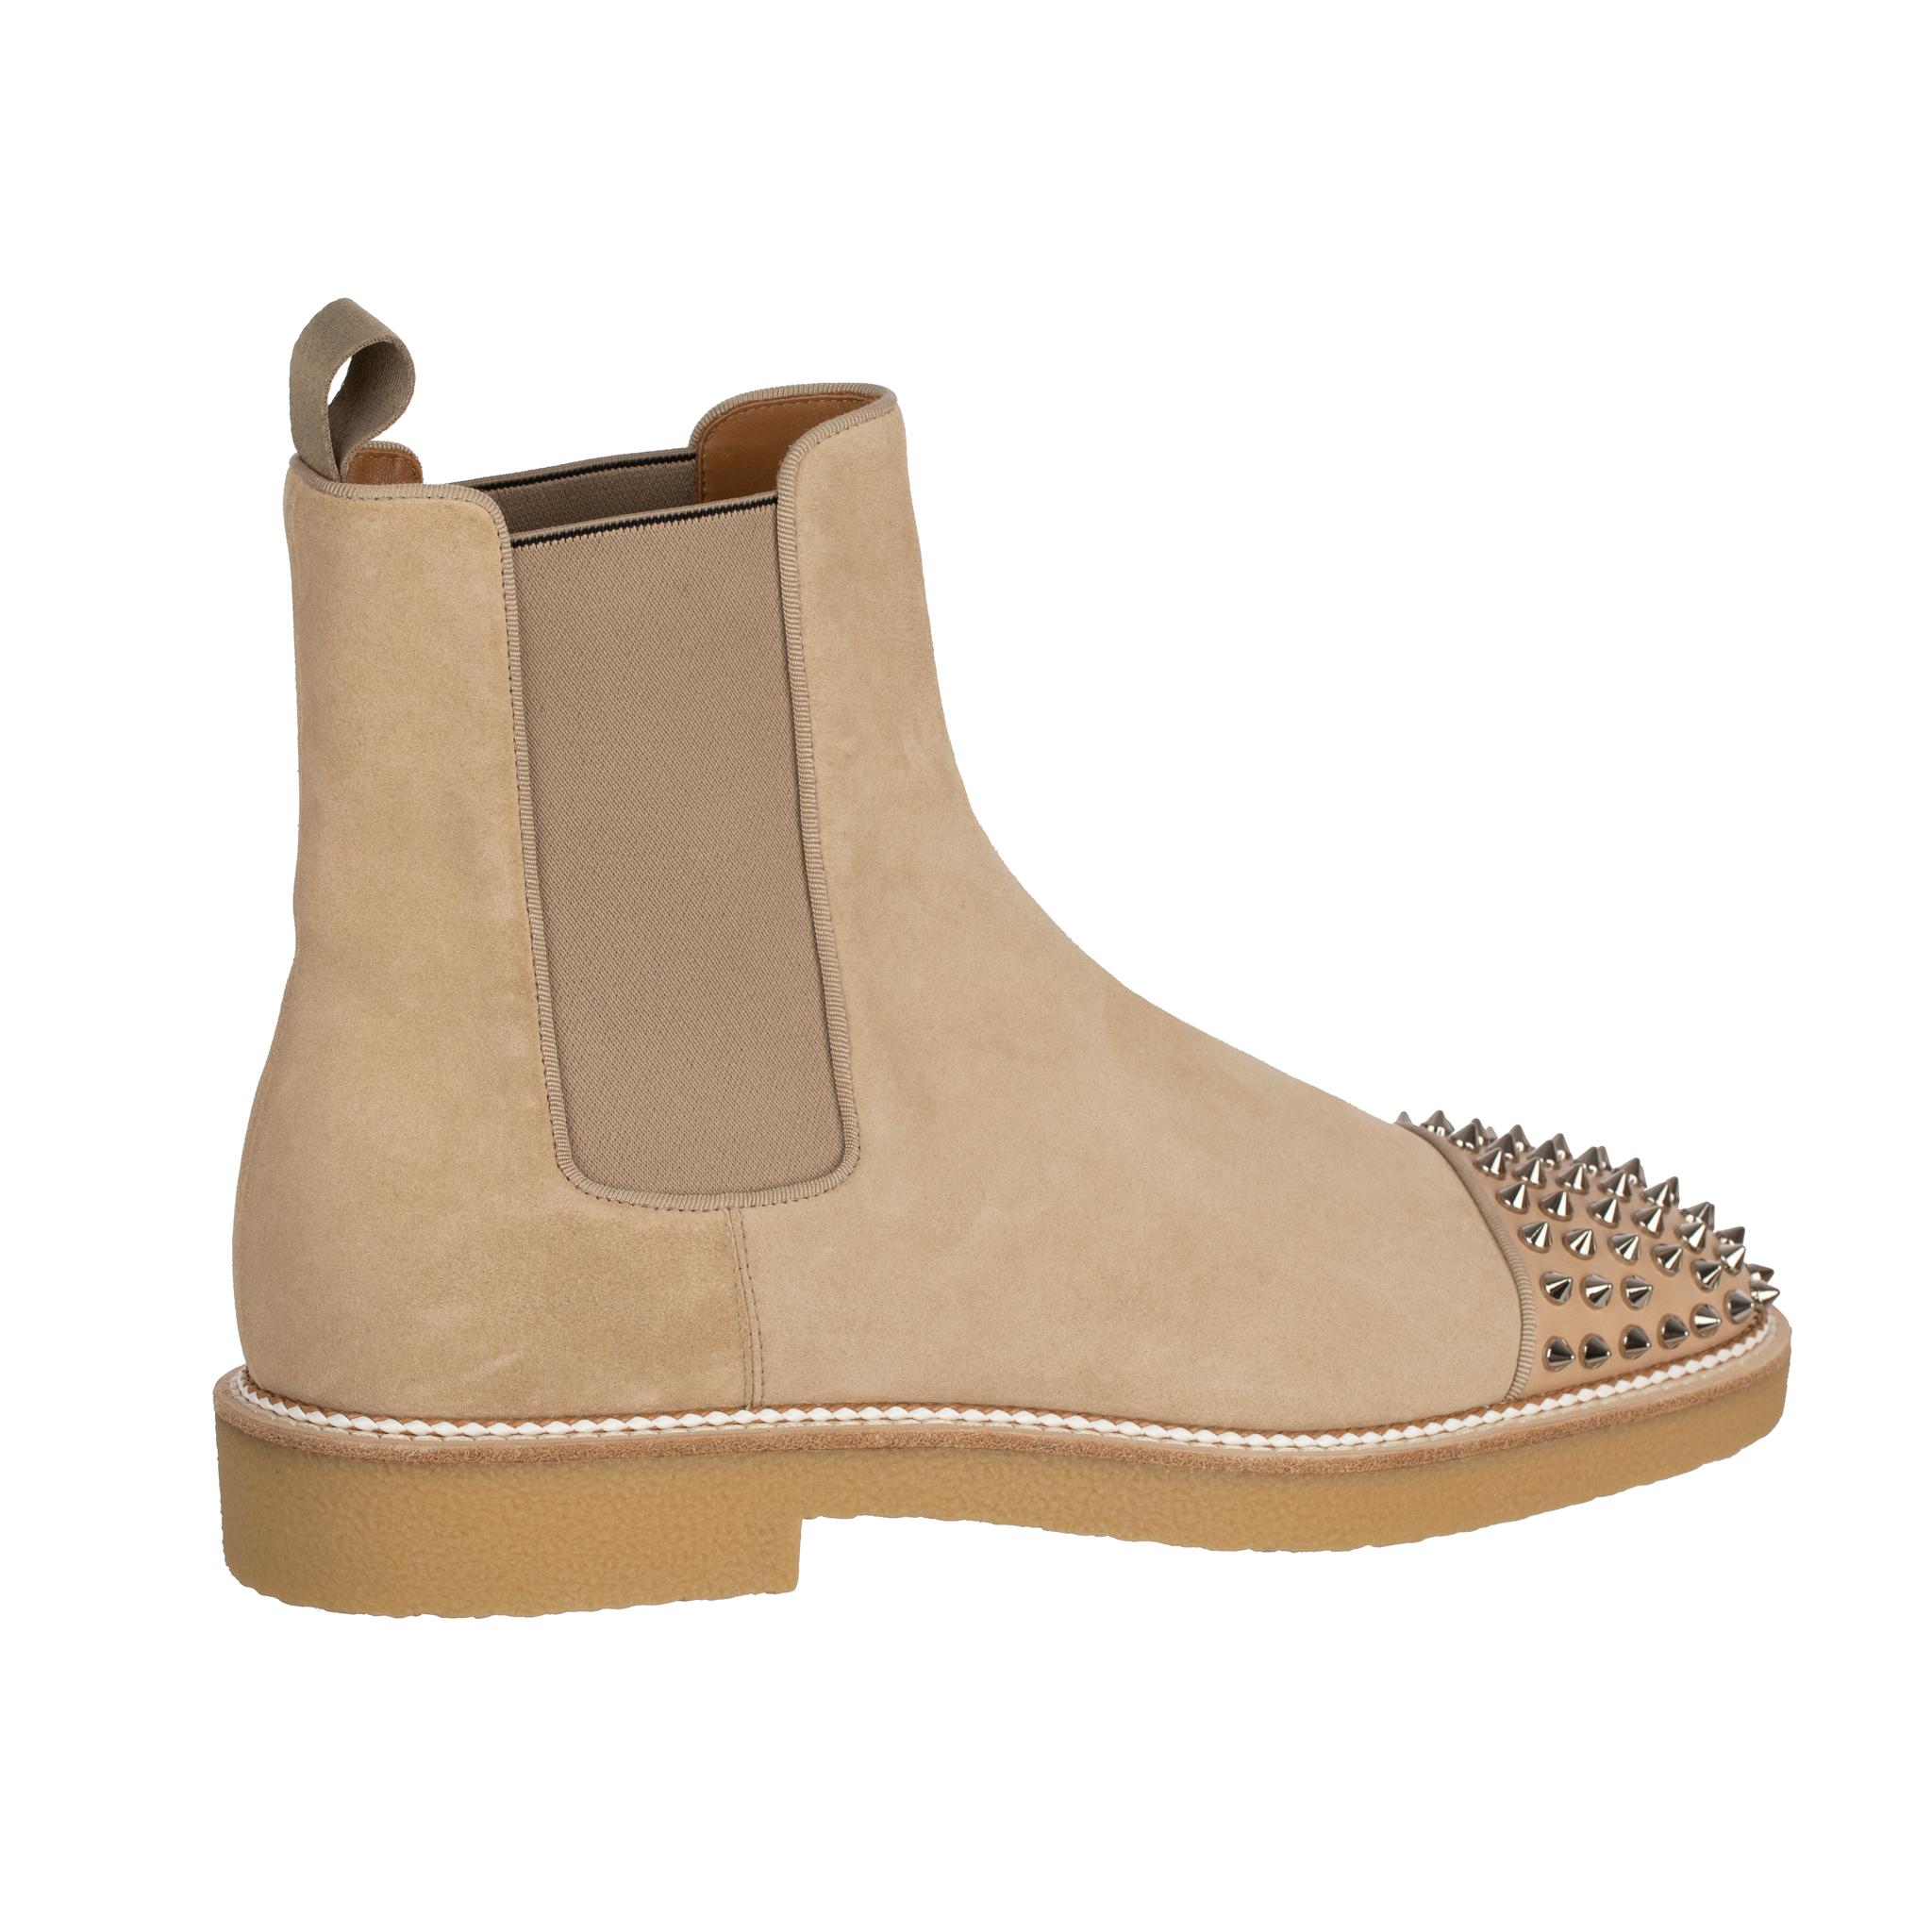 
Brand: Christian Louboutin

Product: Boots

Size: 41.5 FR

Colour: Beige

Material: Suede & Studs

Condition: Pristine; Never Worn

Accompanied By: Boots Only

